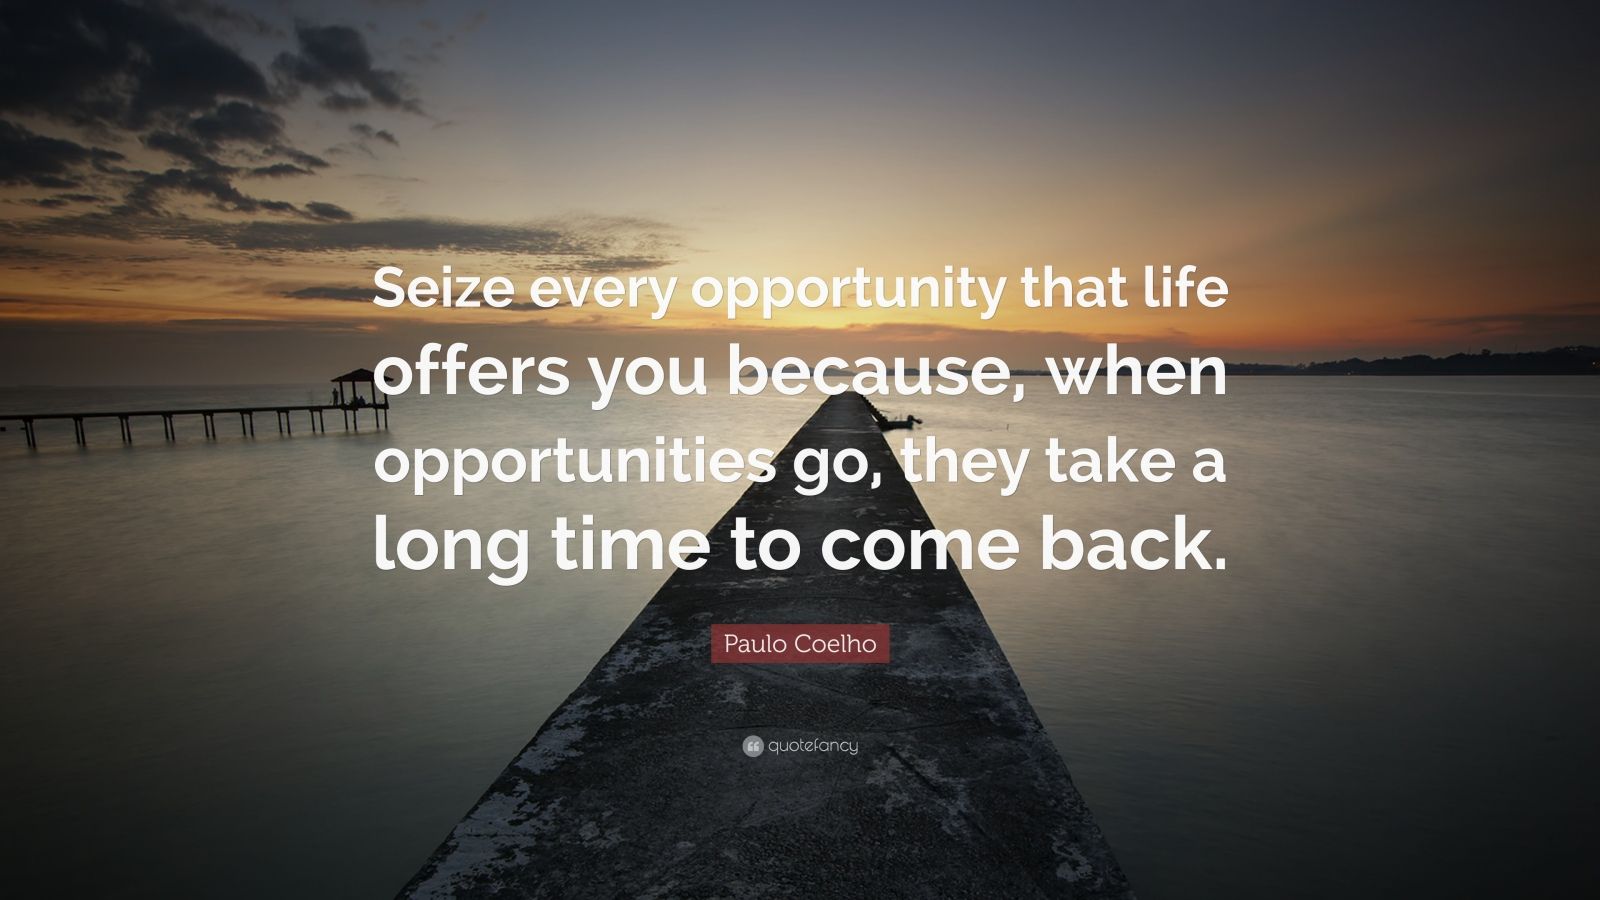 Paulo Coelho Quote: “Seize every opportunity that life offers you